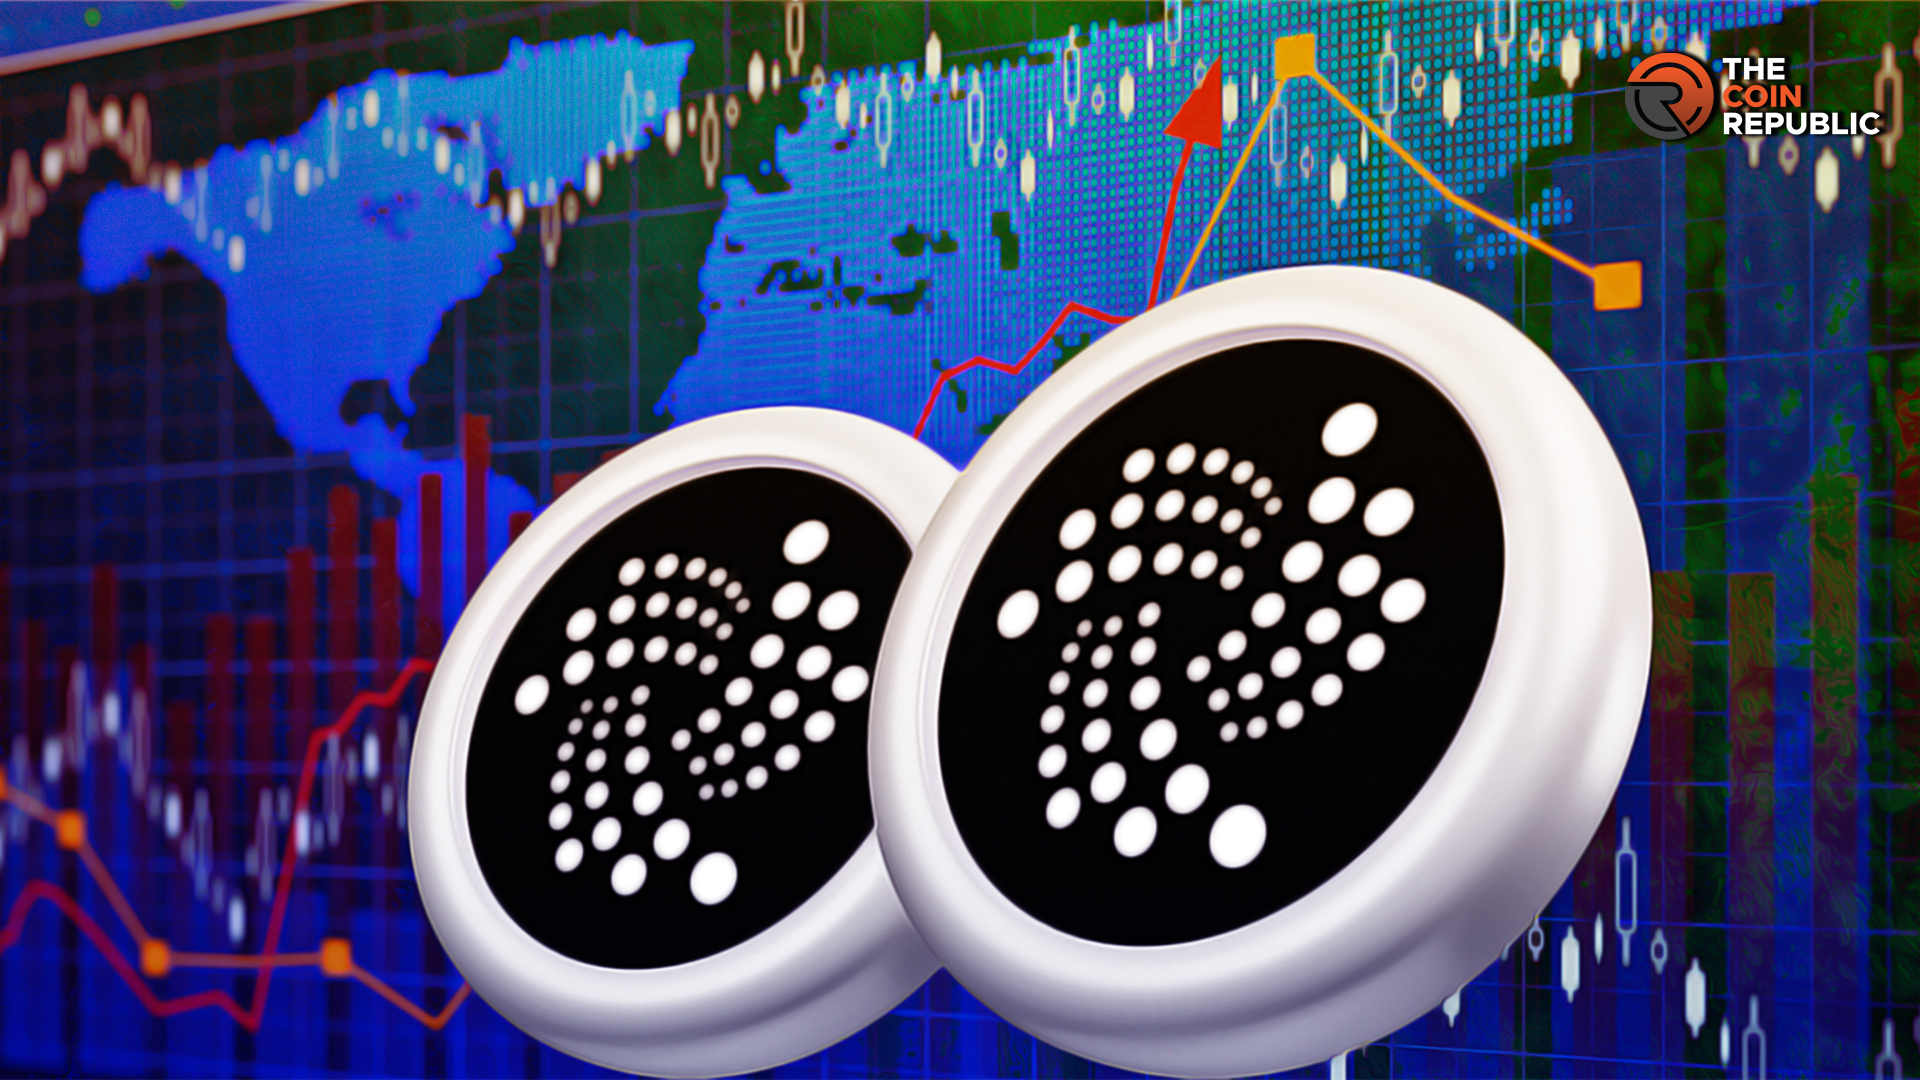 IOTA Introduces New Era 2.0, How Will This Impact Coin’s Price?